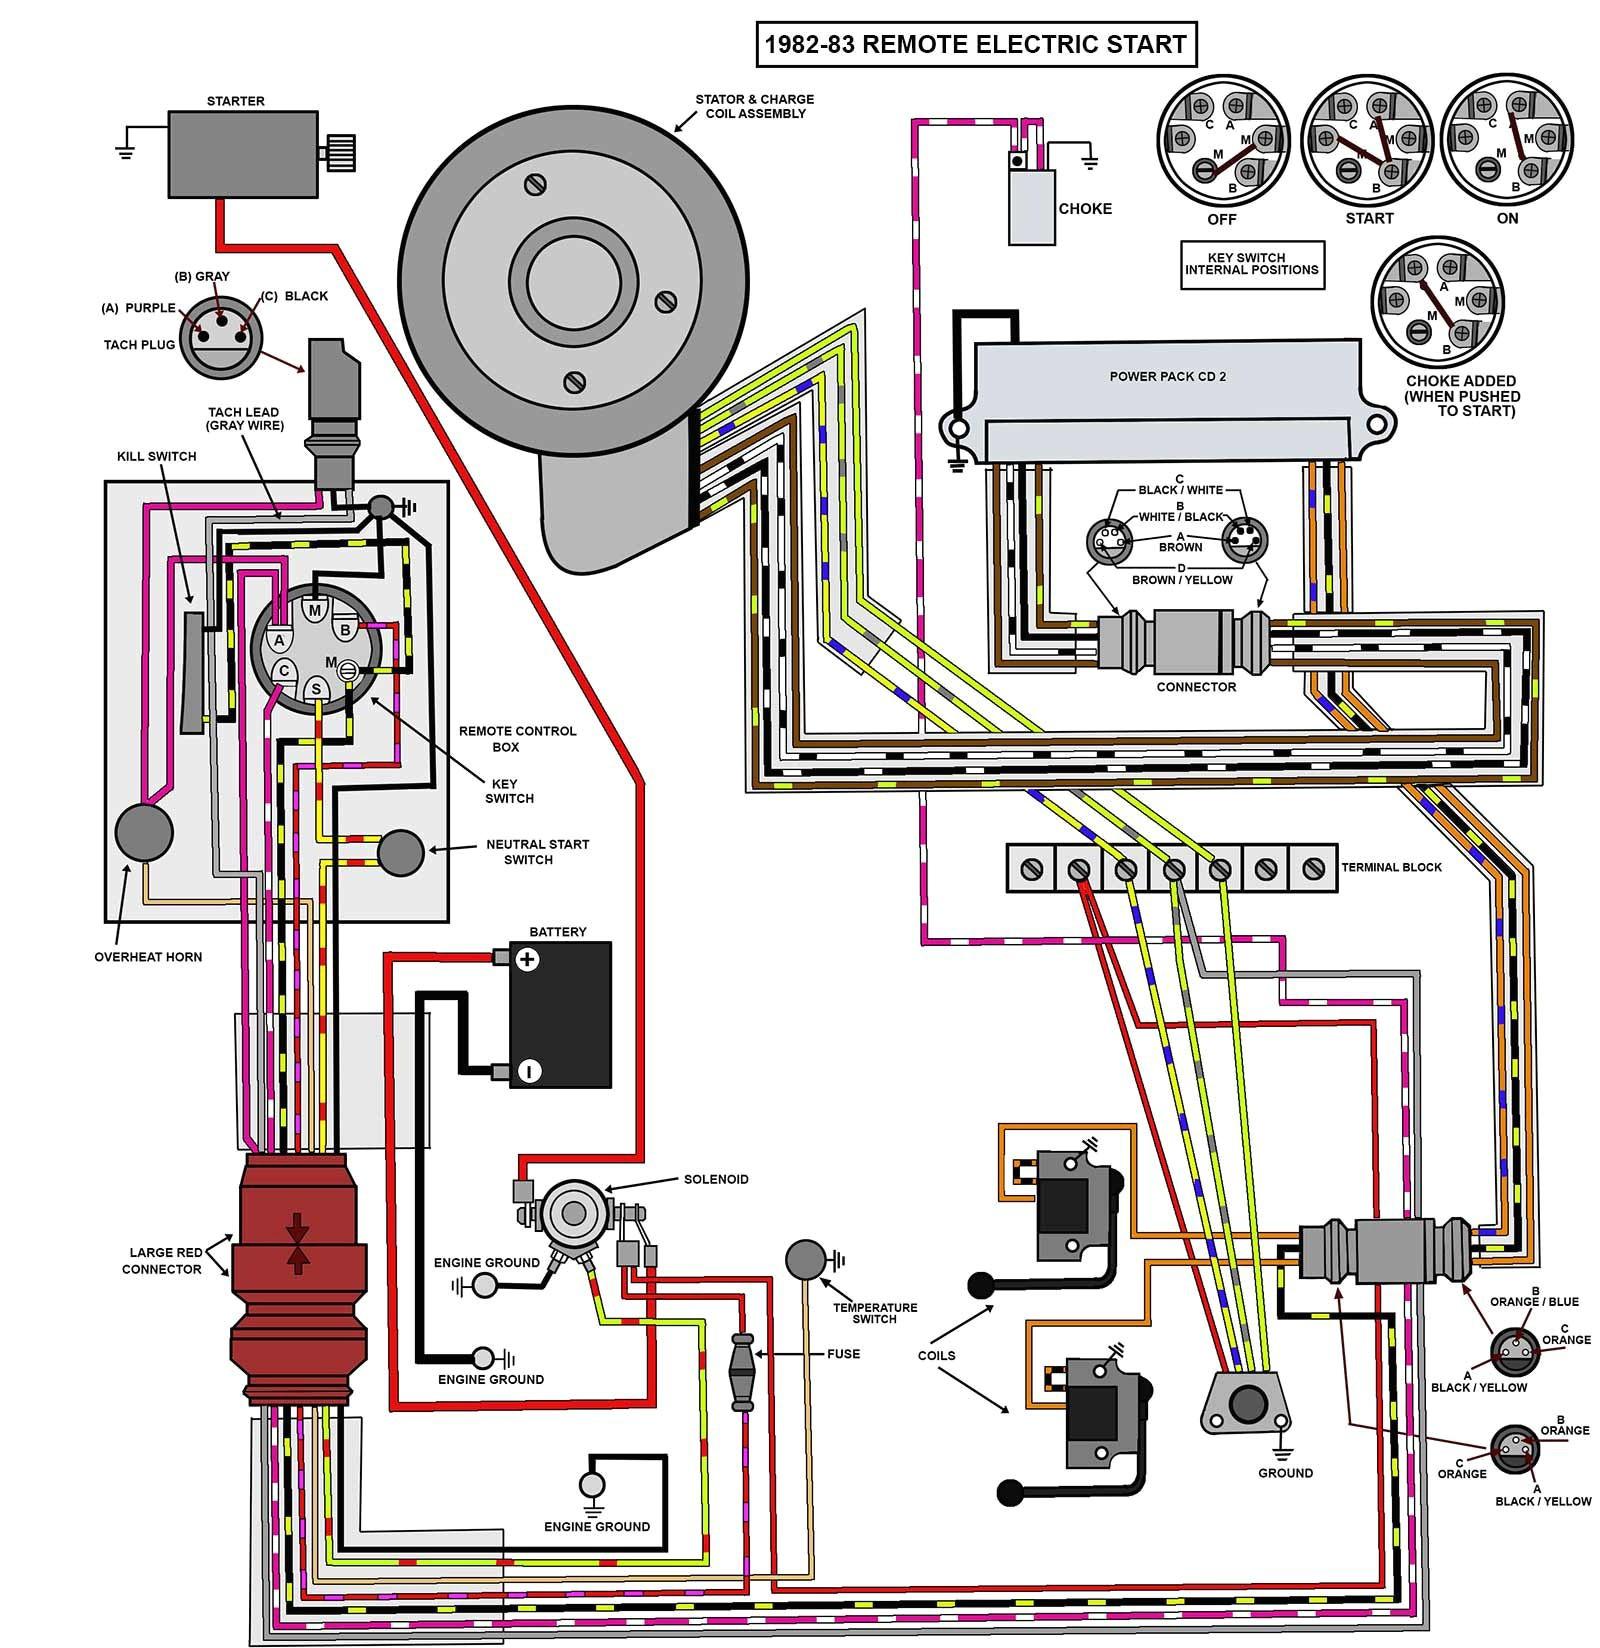 Wiring Diagram For Johnson Outboard Motor Save Evinrude Throughout - Johnson Outboard Wiring Diagram Pdf